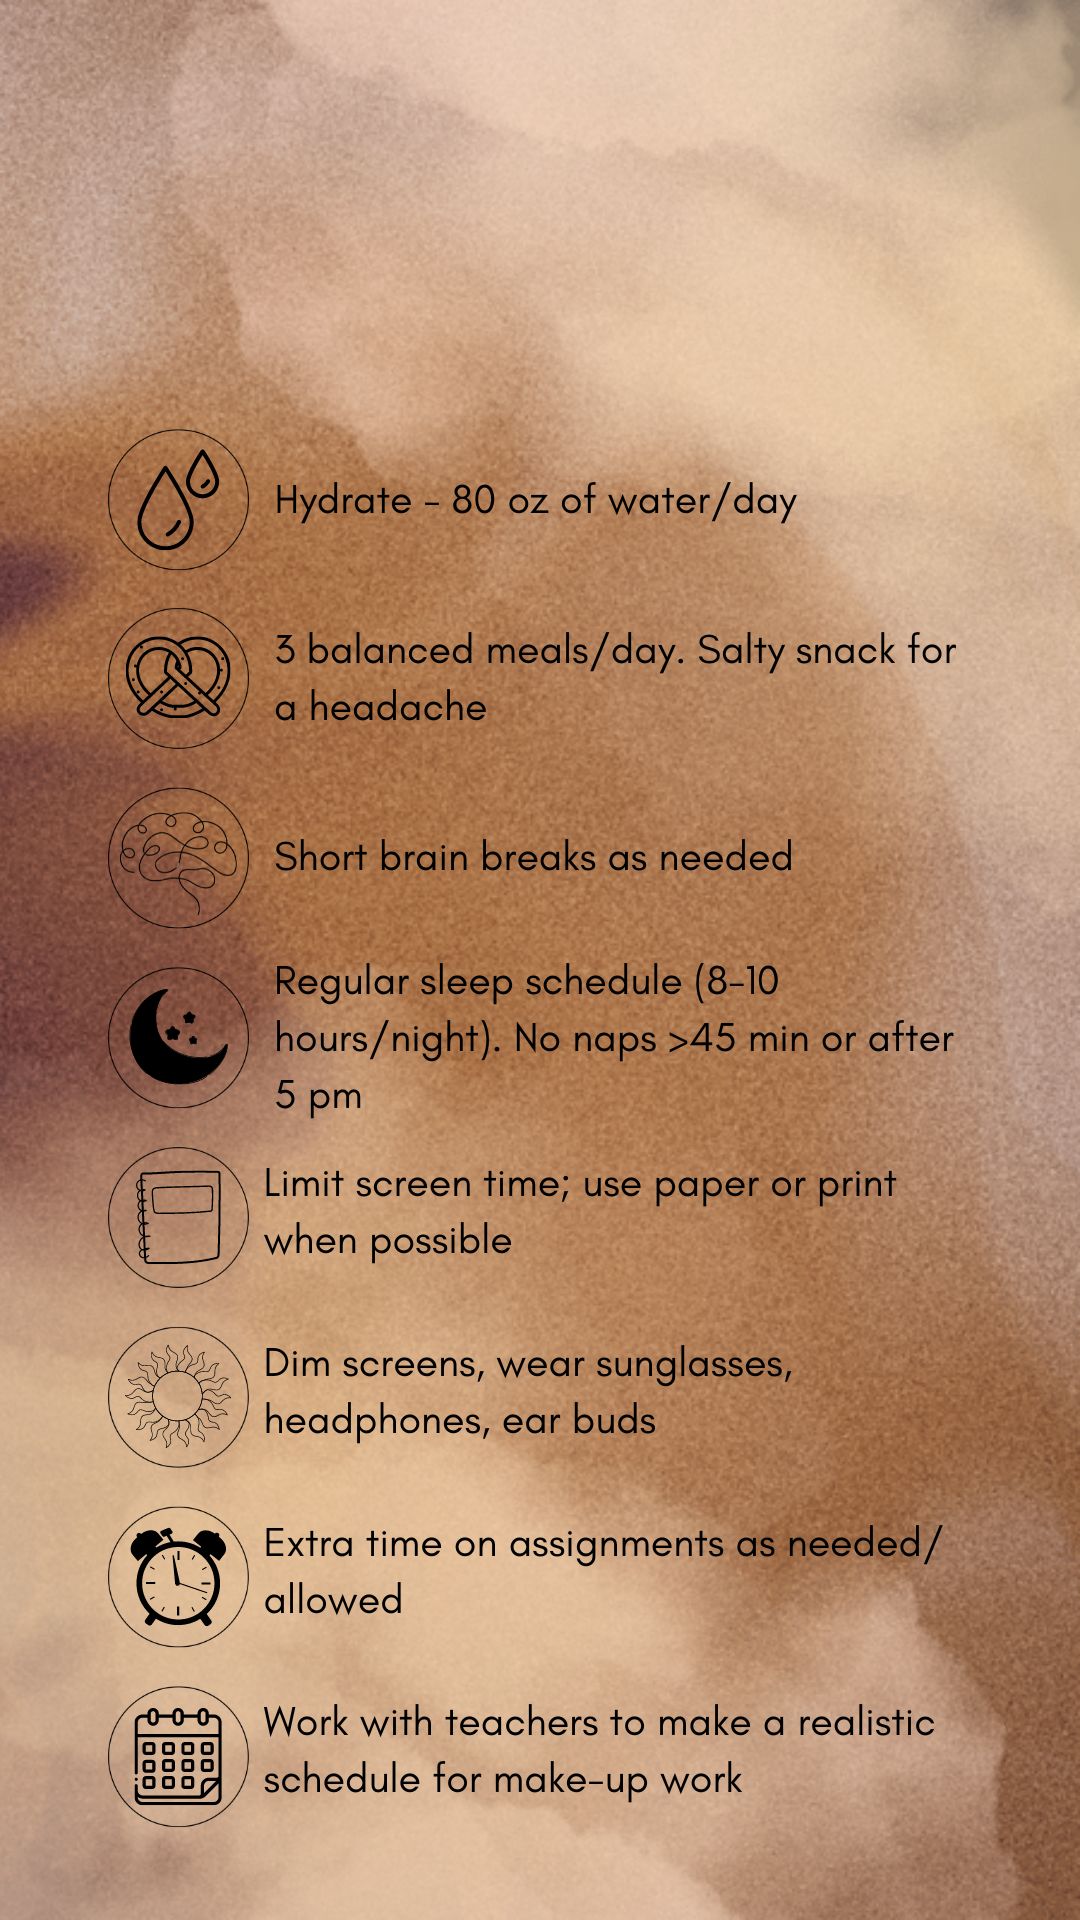 Black text with graphics with concussion treatment tips against a tan and brown backdrop. Concussion treatment tips in black text and graphics against a pink backdrop. The tips read, hydrate (80 oz. water/day). Eat 3 balanced meals/day, salt snack for headache. Short brain breaks as needed, Sleep time (8-10 hrs/night), no naps > 45 mins. or after 5 pm. Limit screens, use paper/print. when possible .Dim screens. wear sunglasses, headphones, earbuds. Allow extra time on assignments as allowed. Pace yourself. Work with teachers to make a realistic schedule for make-up work.